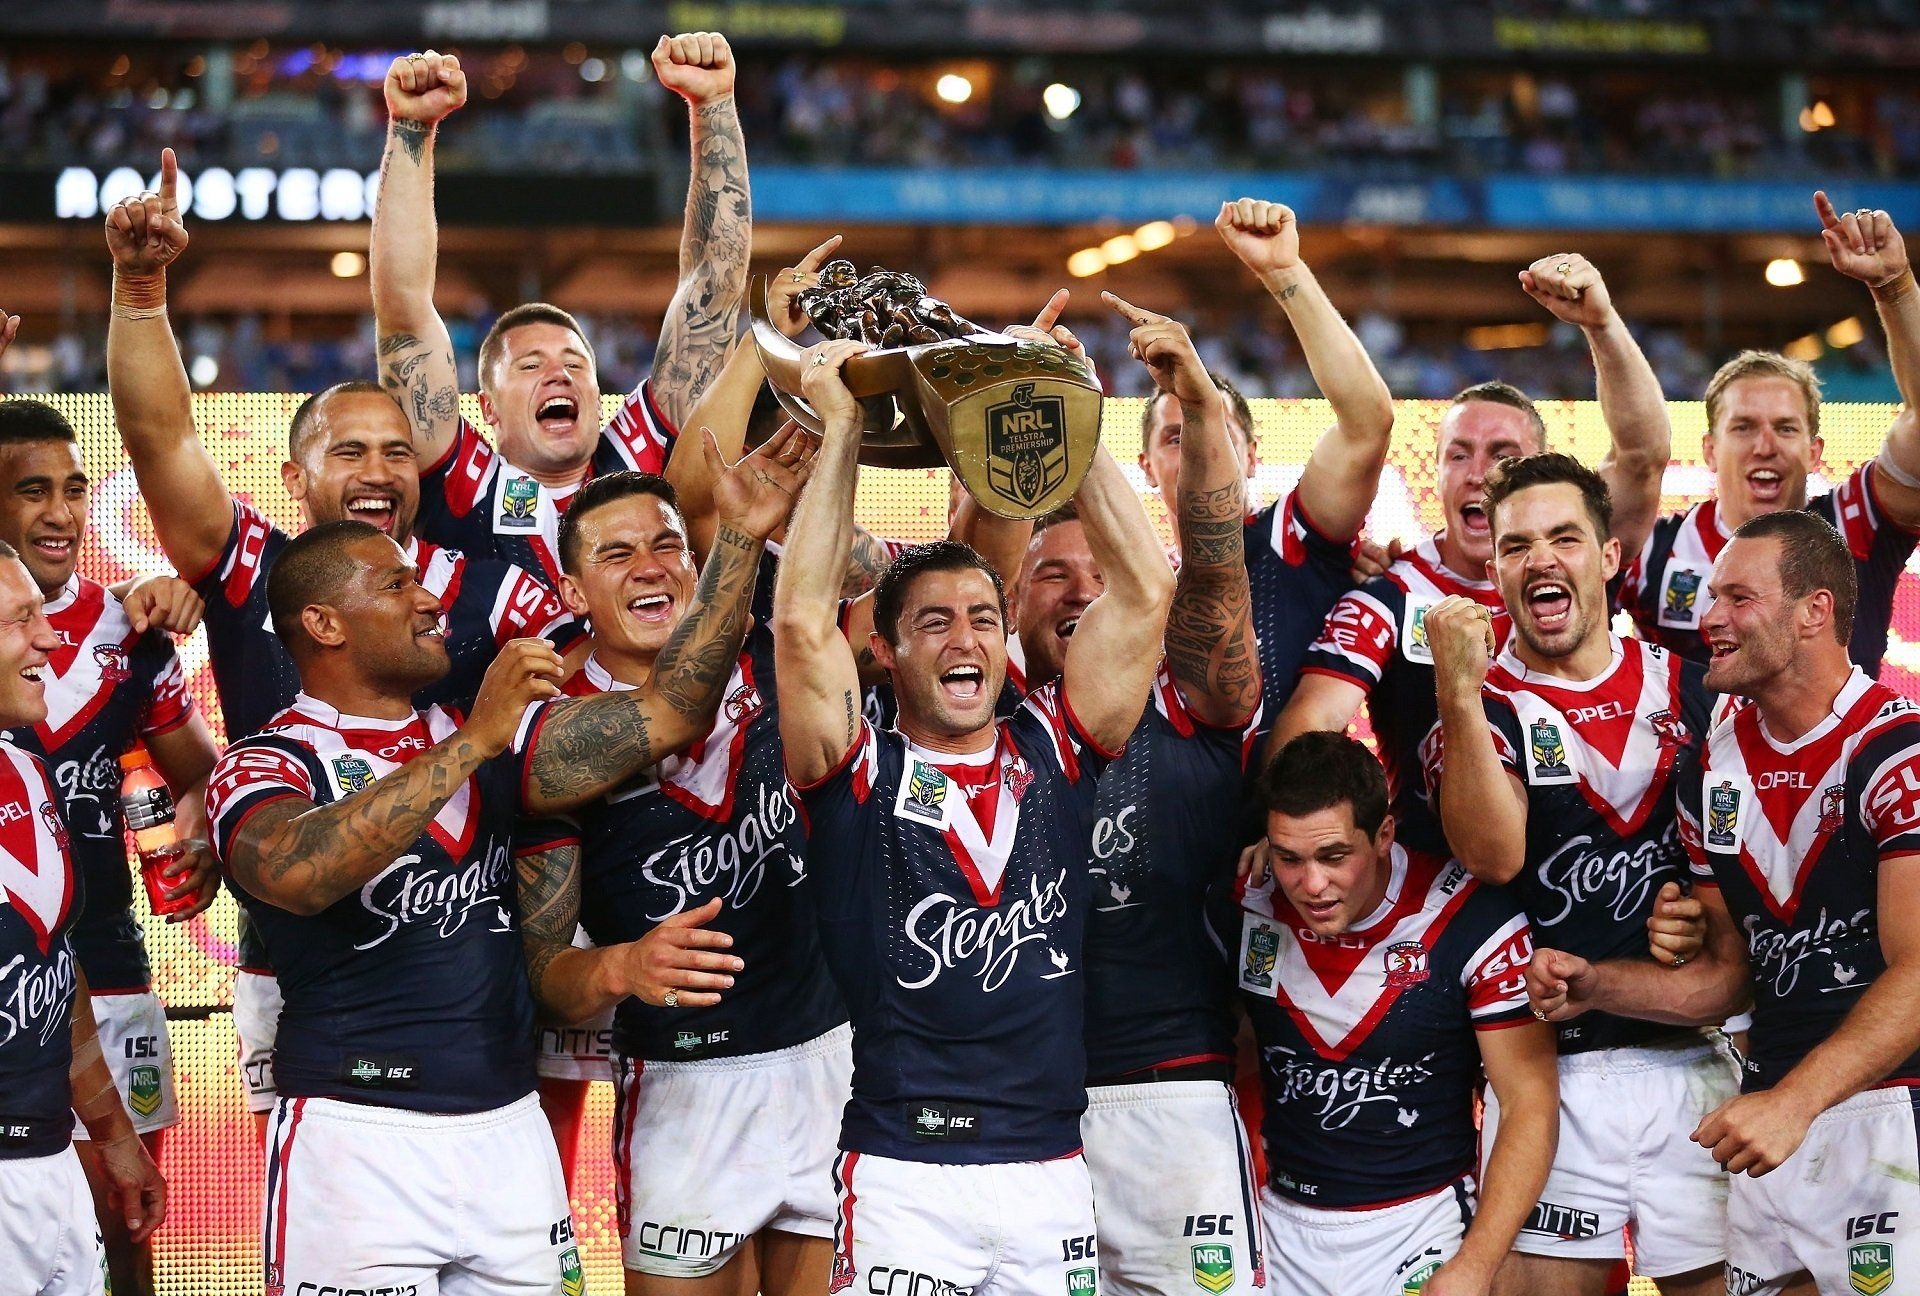 Rugby League: The Roosters celebrate with the premiership trophy after winning the NRL grand final in 2013. 1920x1300 HD Wallpaper.